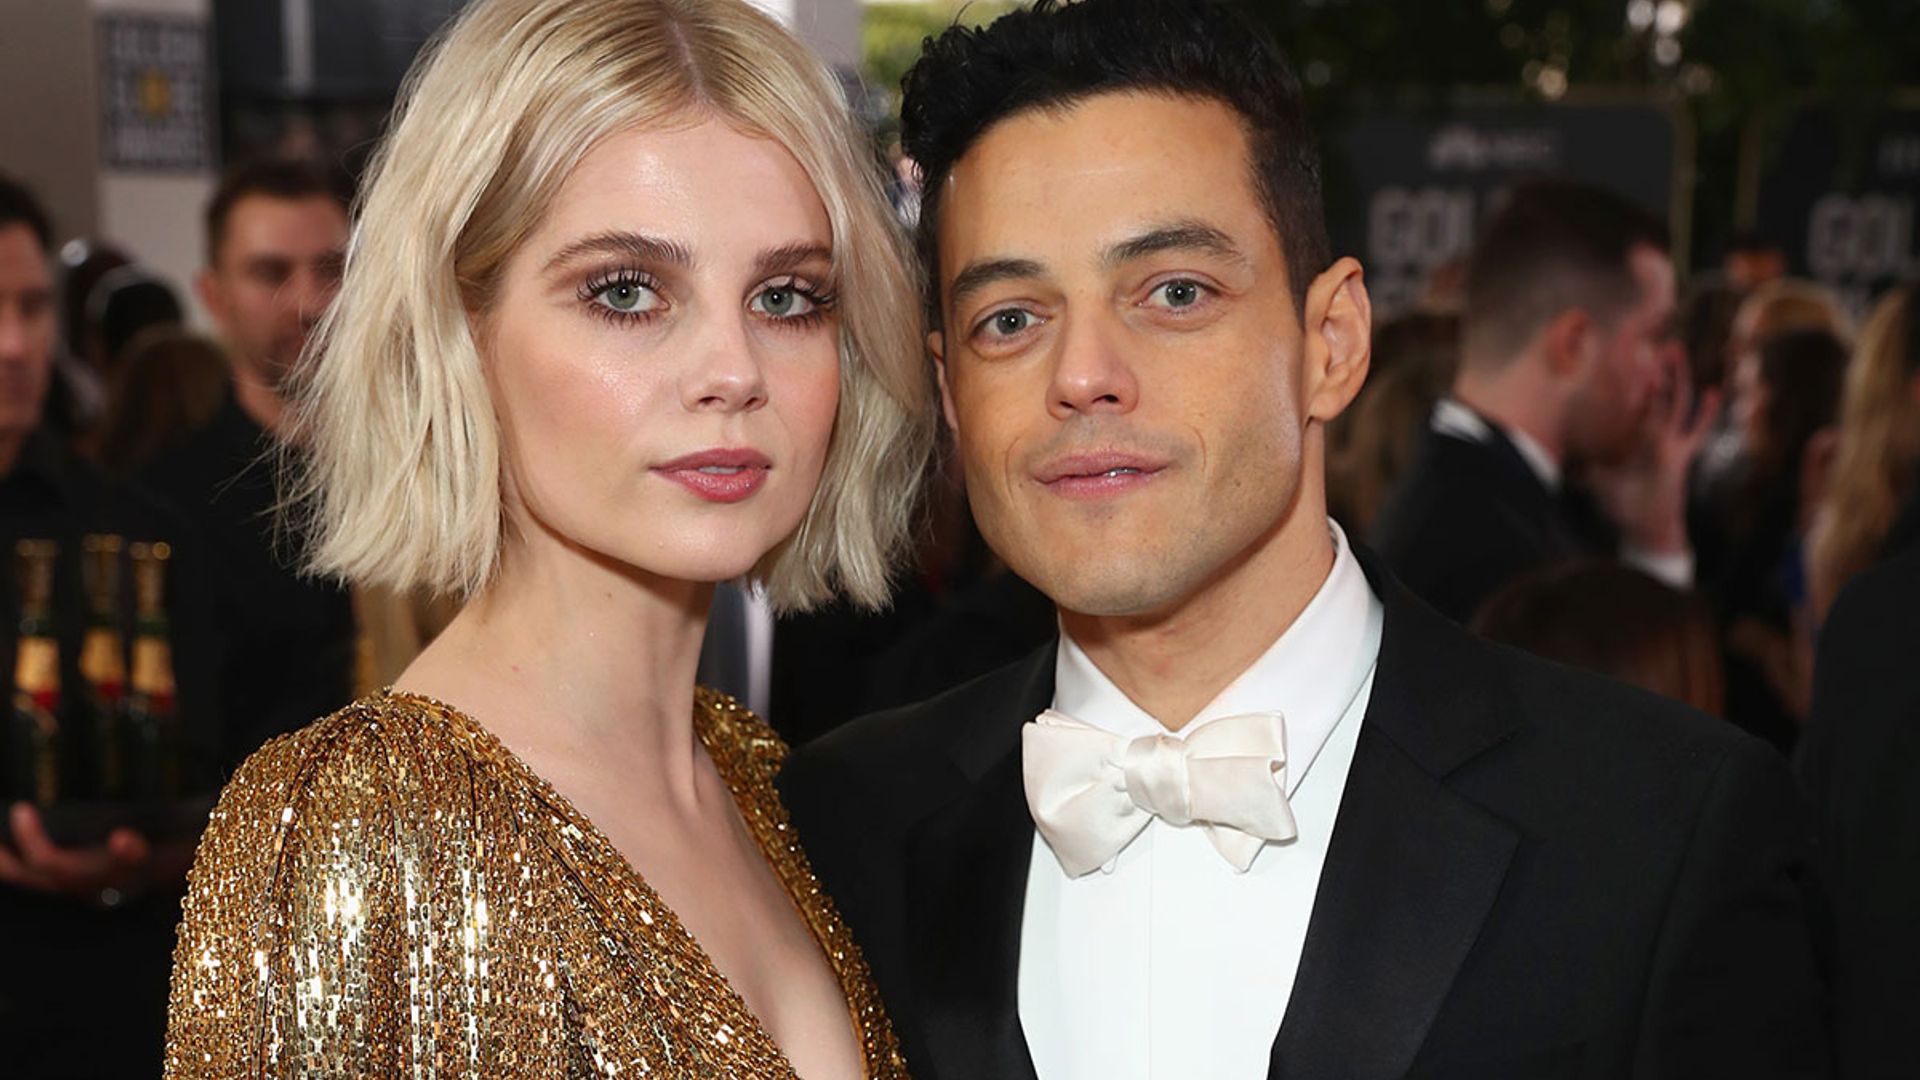 The Ipcress File: all you need to know about star Lucy Boynton's relationship with Rami Malek